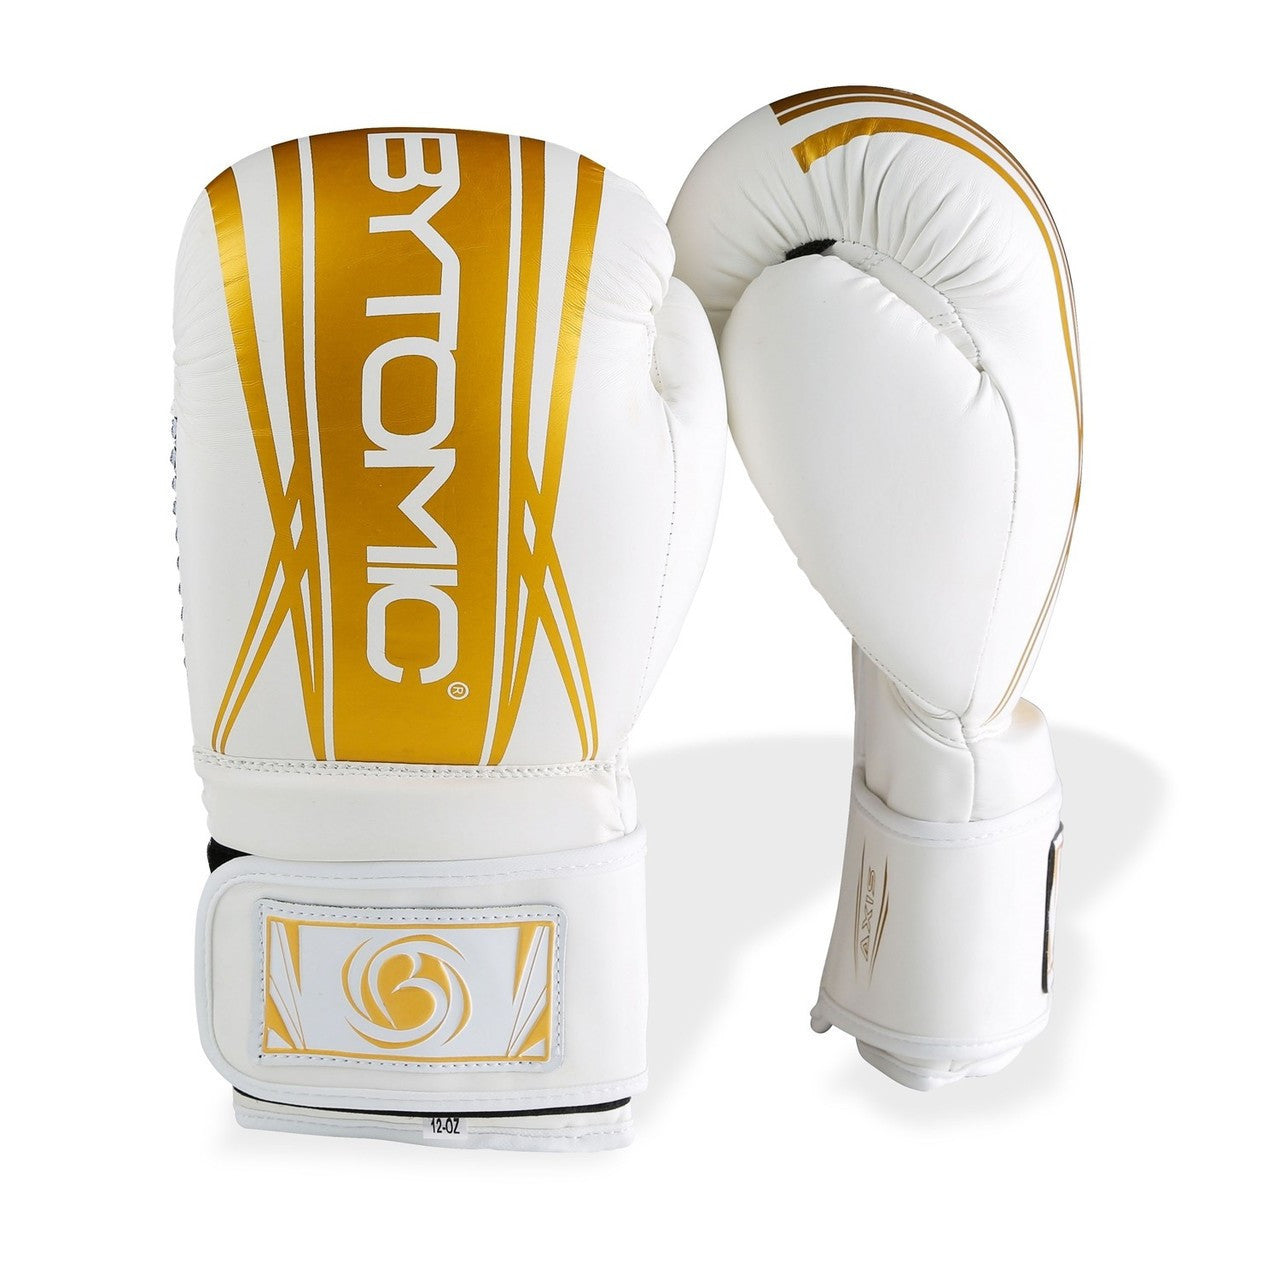 BYTOMIC AXIS V2 BOXING GLOVES